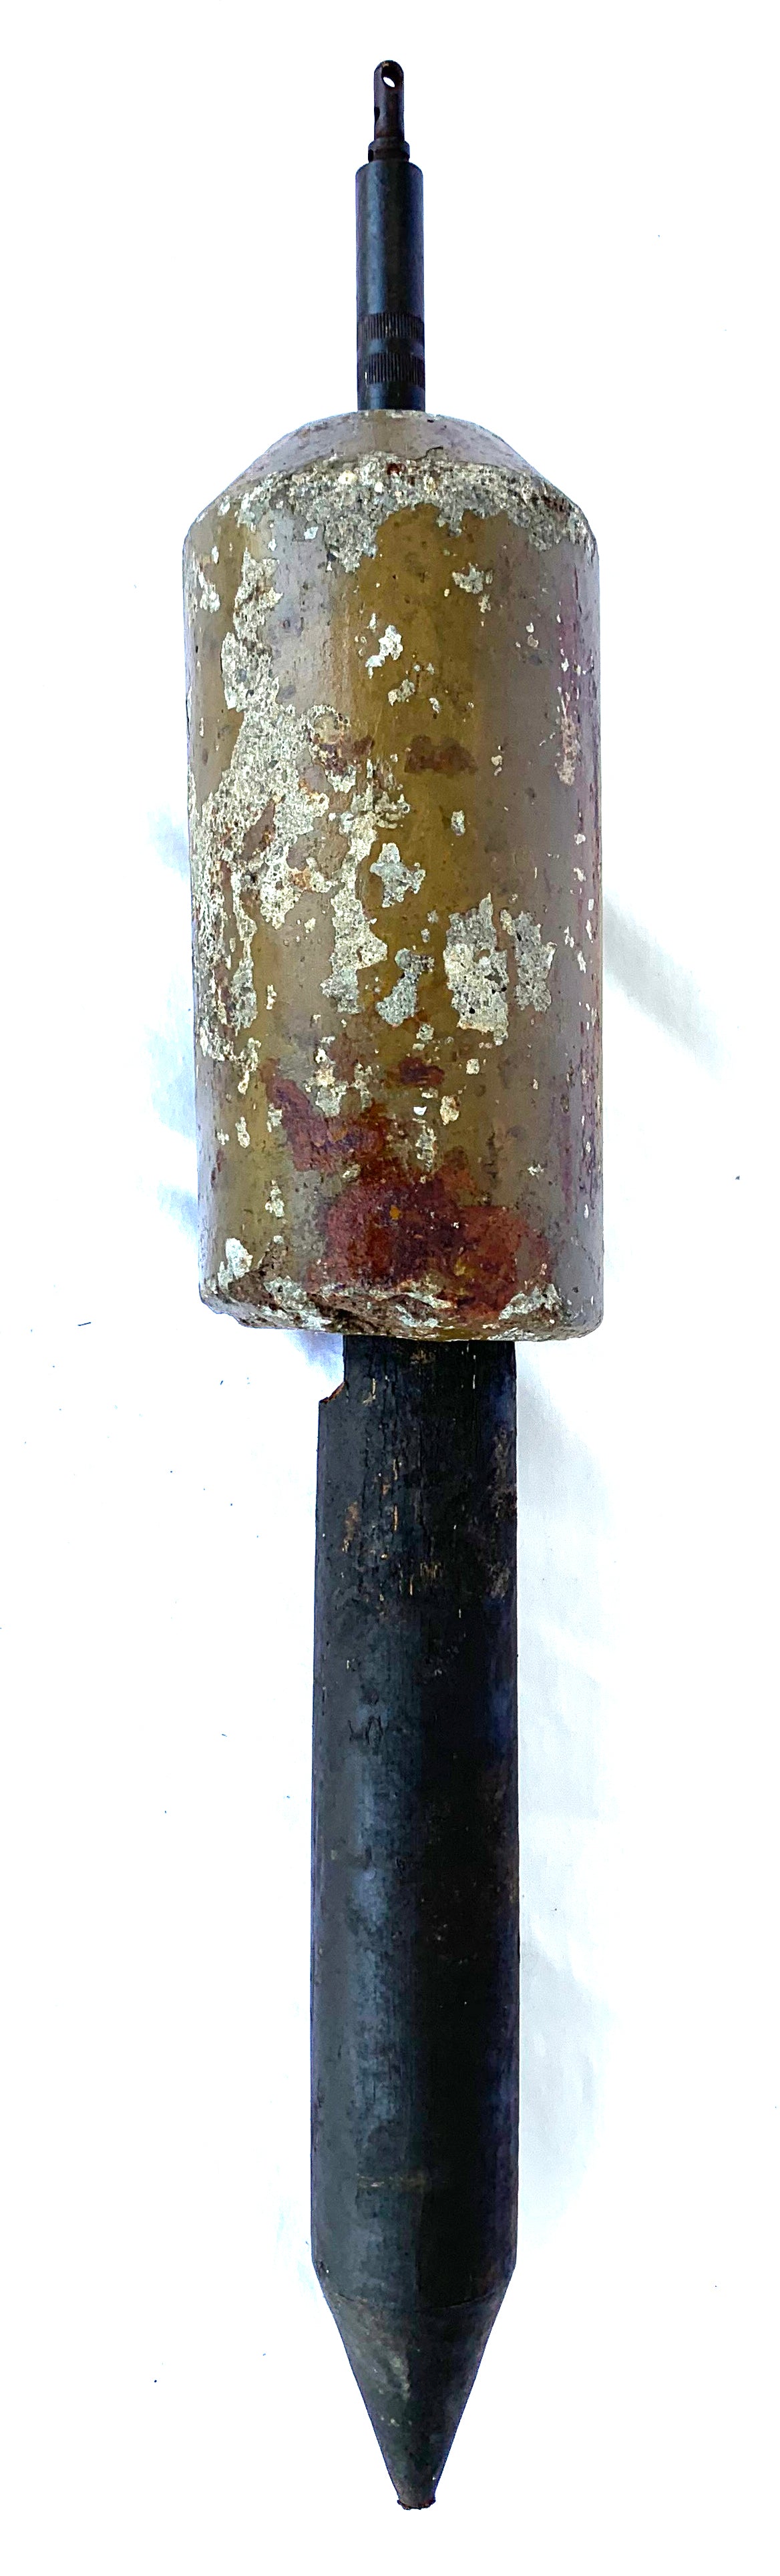 WW2 German Concrete Mine with Fuse and Stake - Inert.